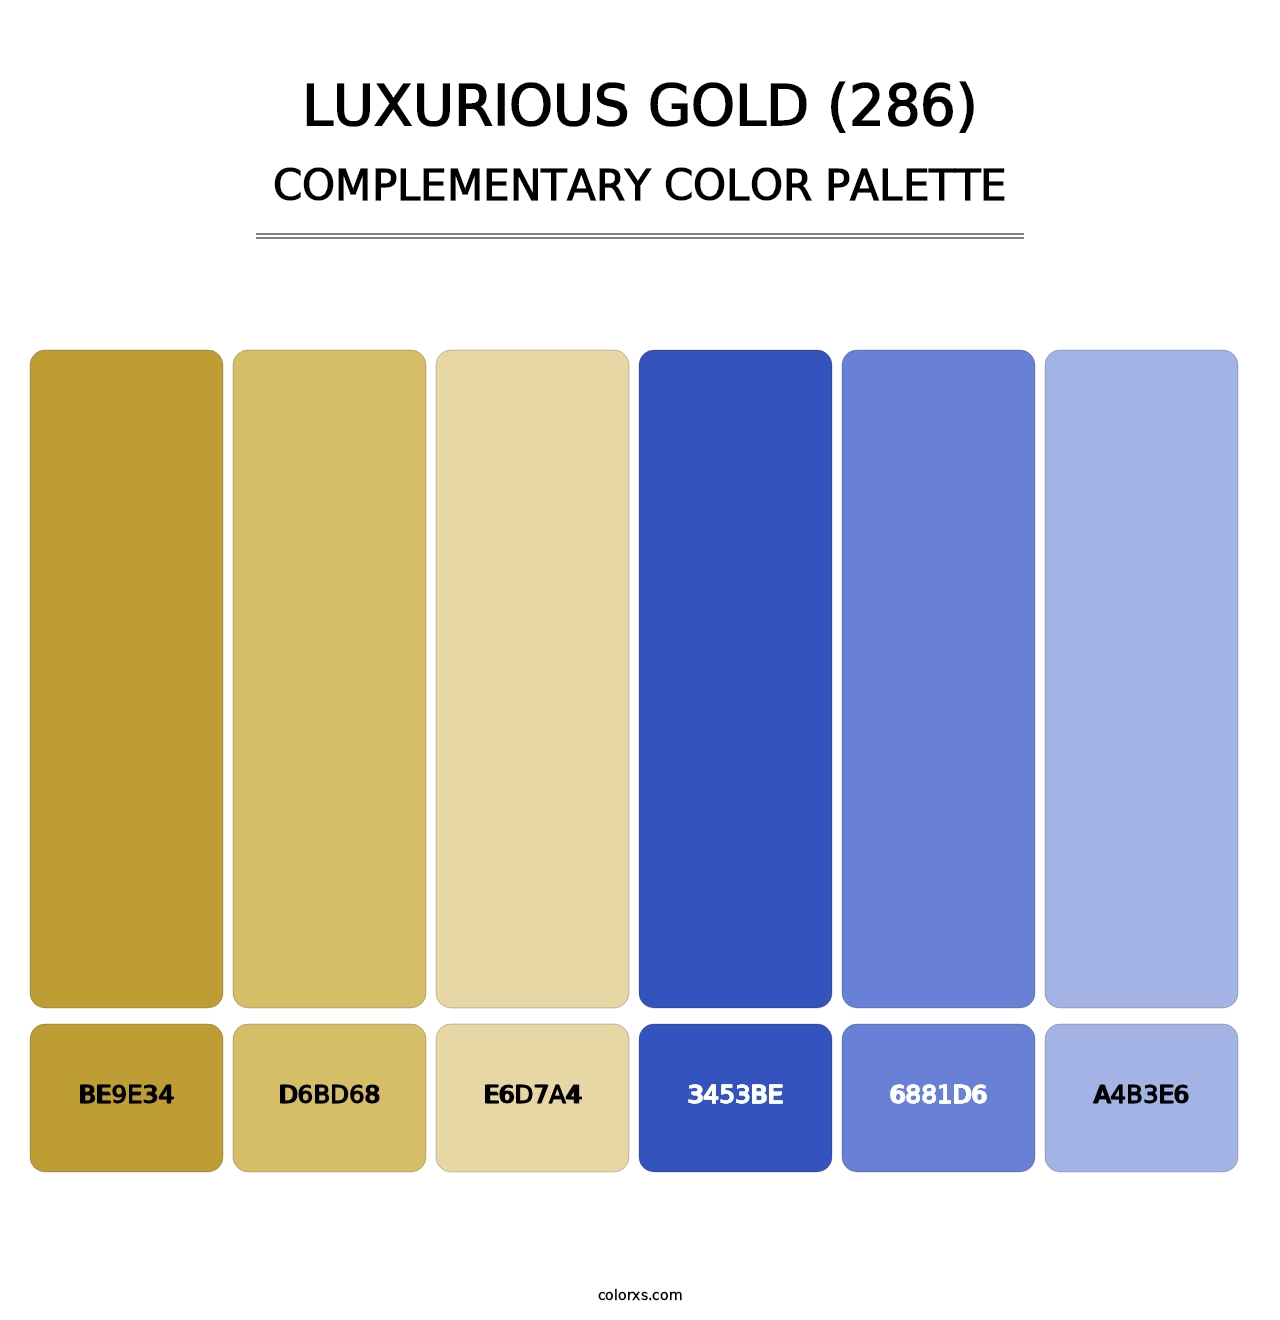 Luxurious Gold (286) - Complementary Color Palette